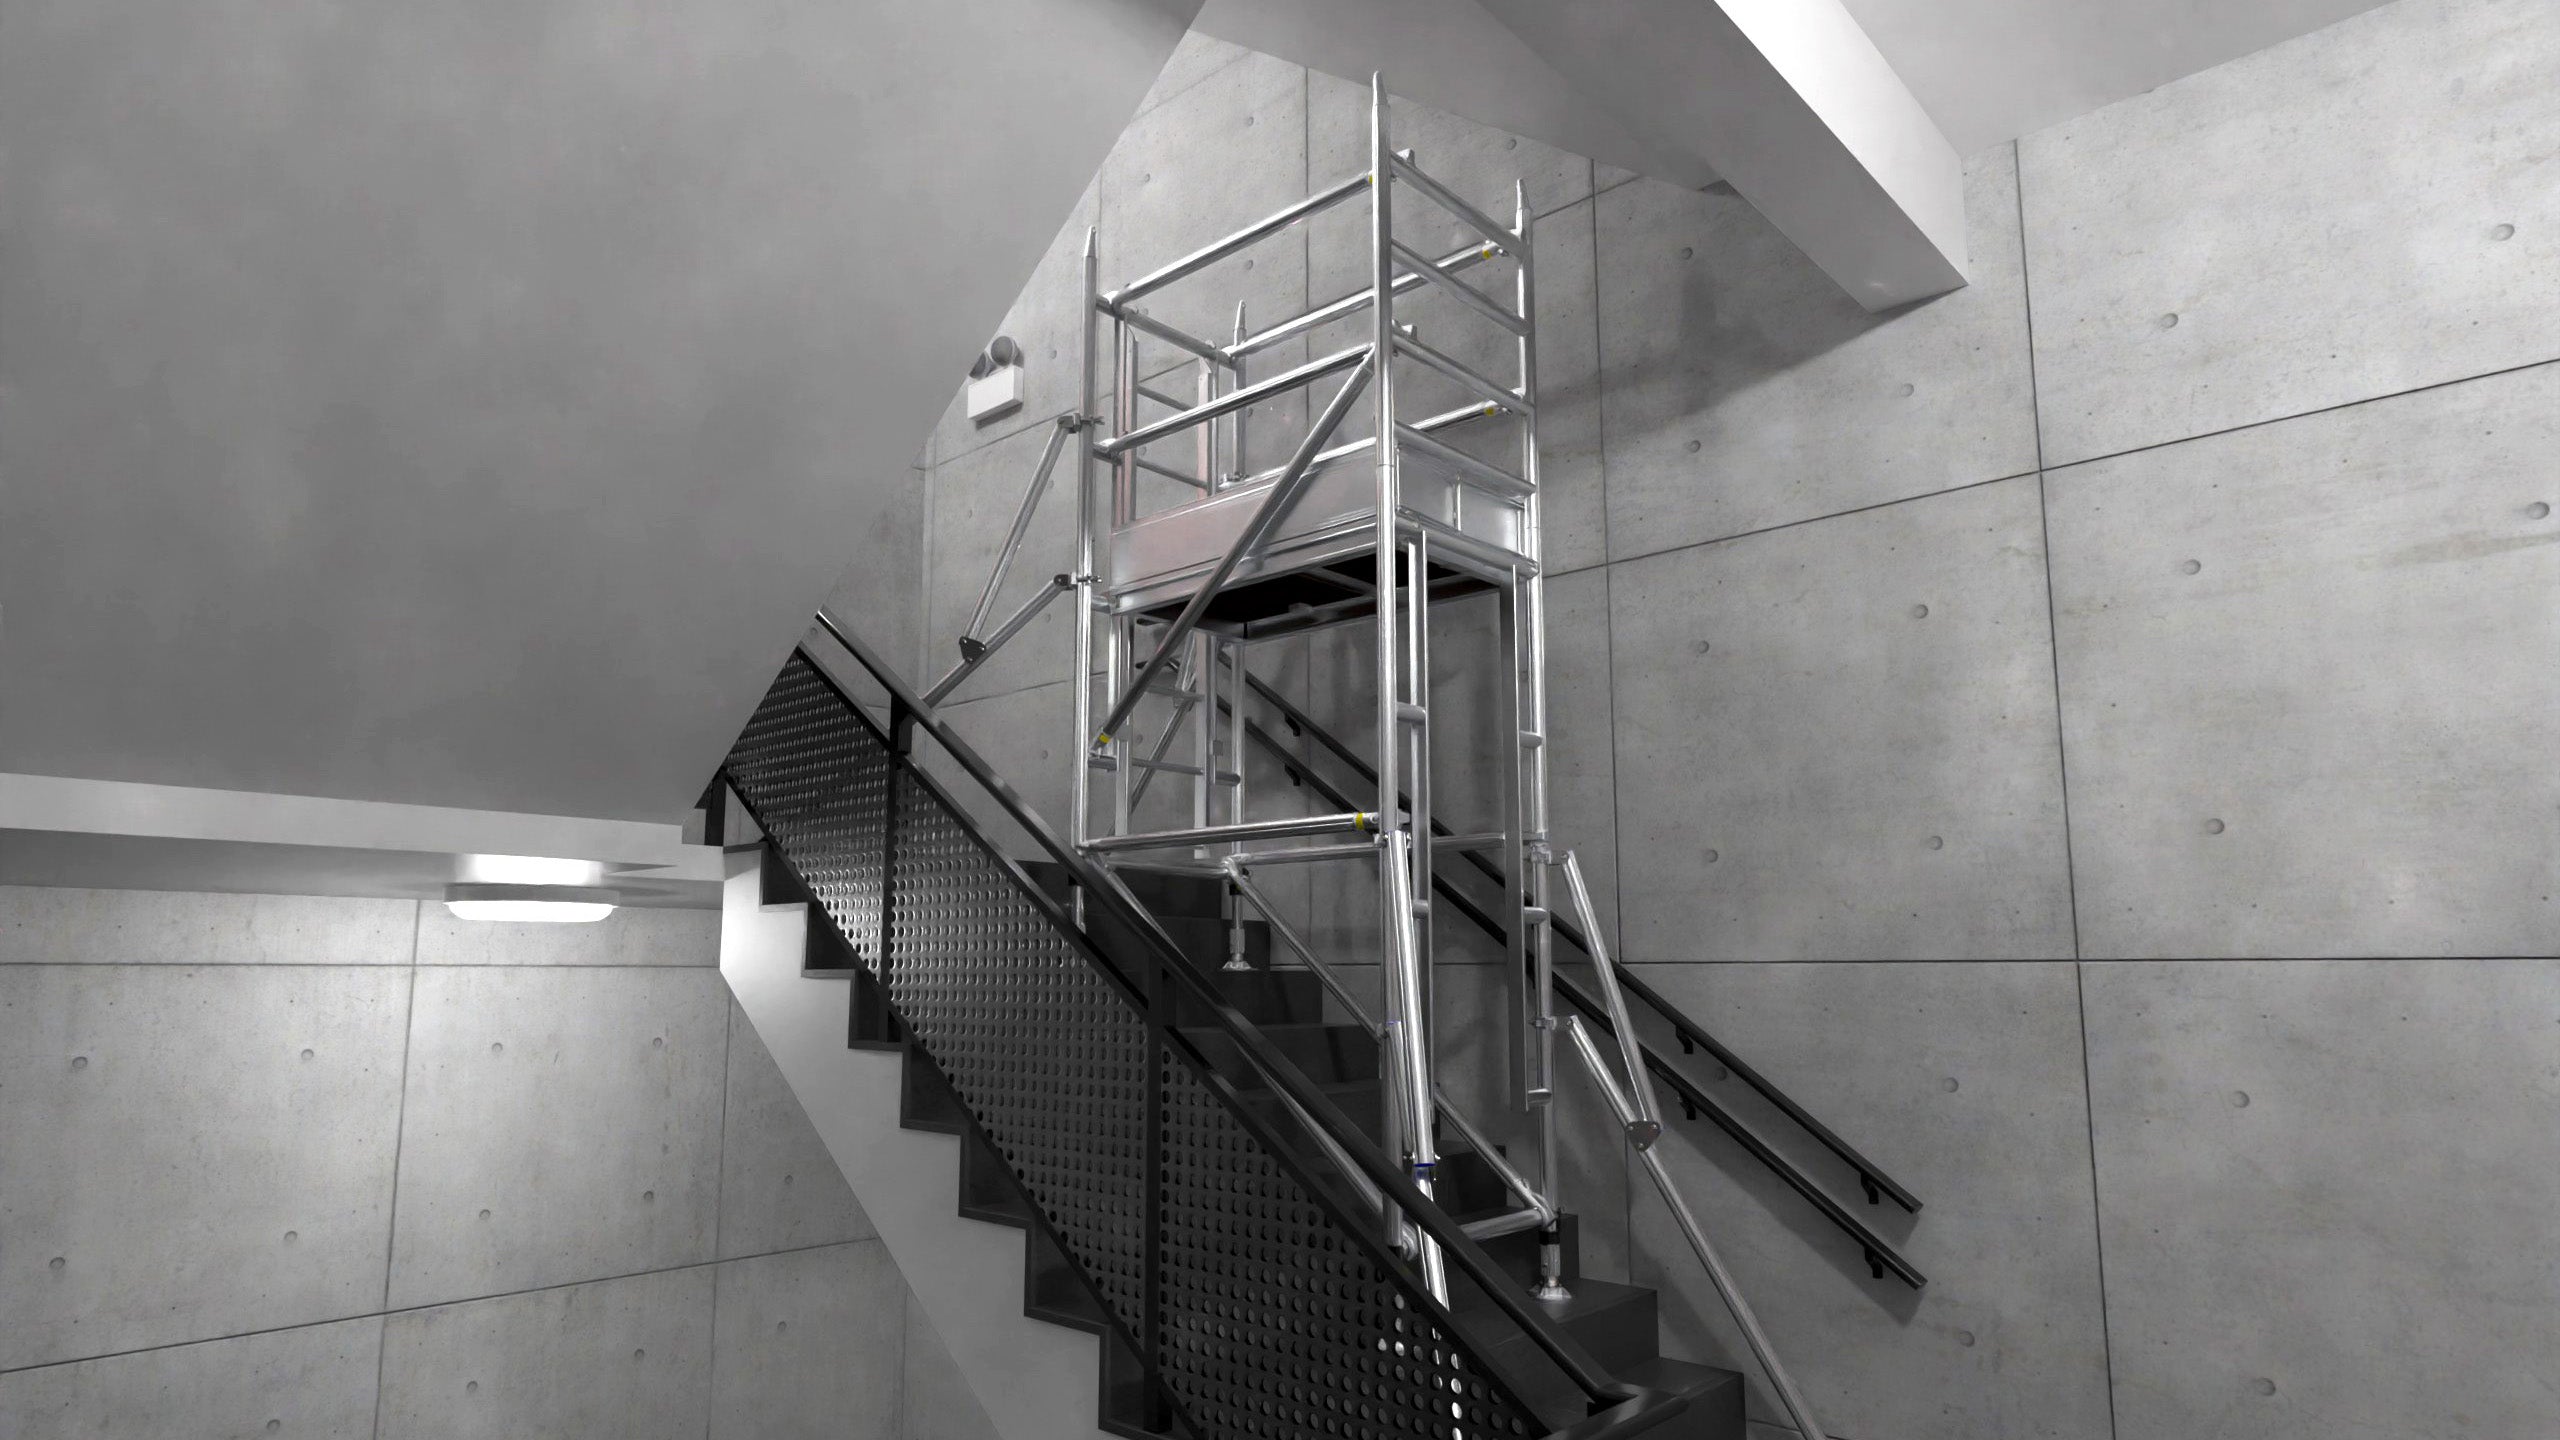 A photo showing the Alto Stairwell Pro Tower on an emergancy exit staircase.